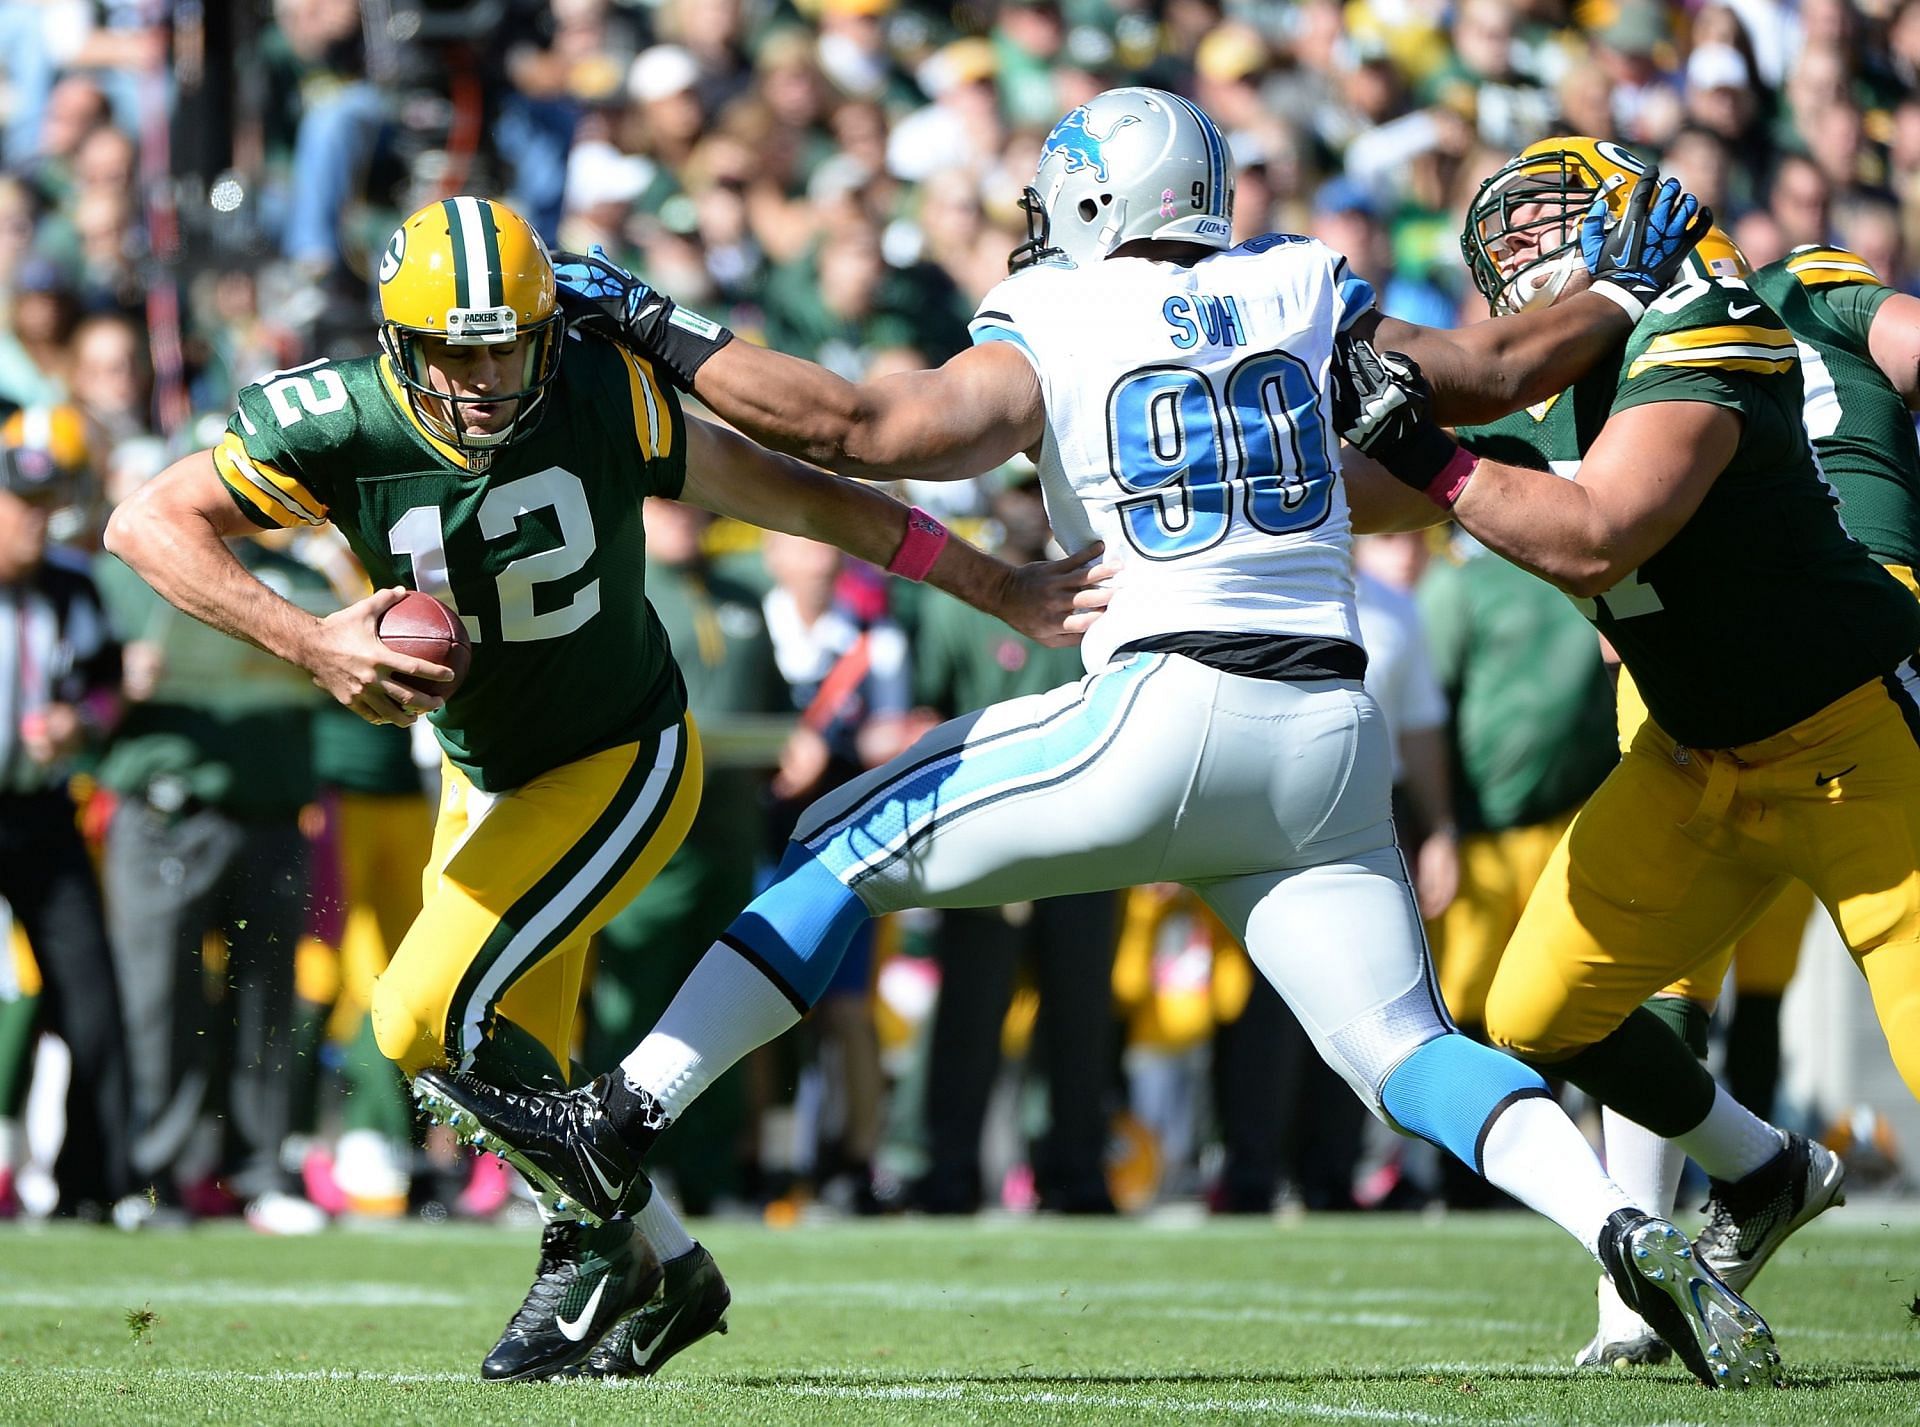 Aaron Rodgers and Ndamukong Suh